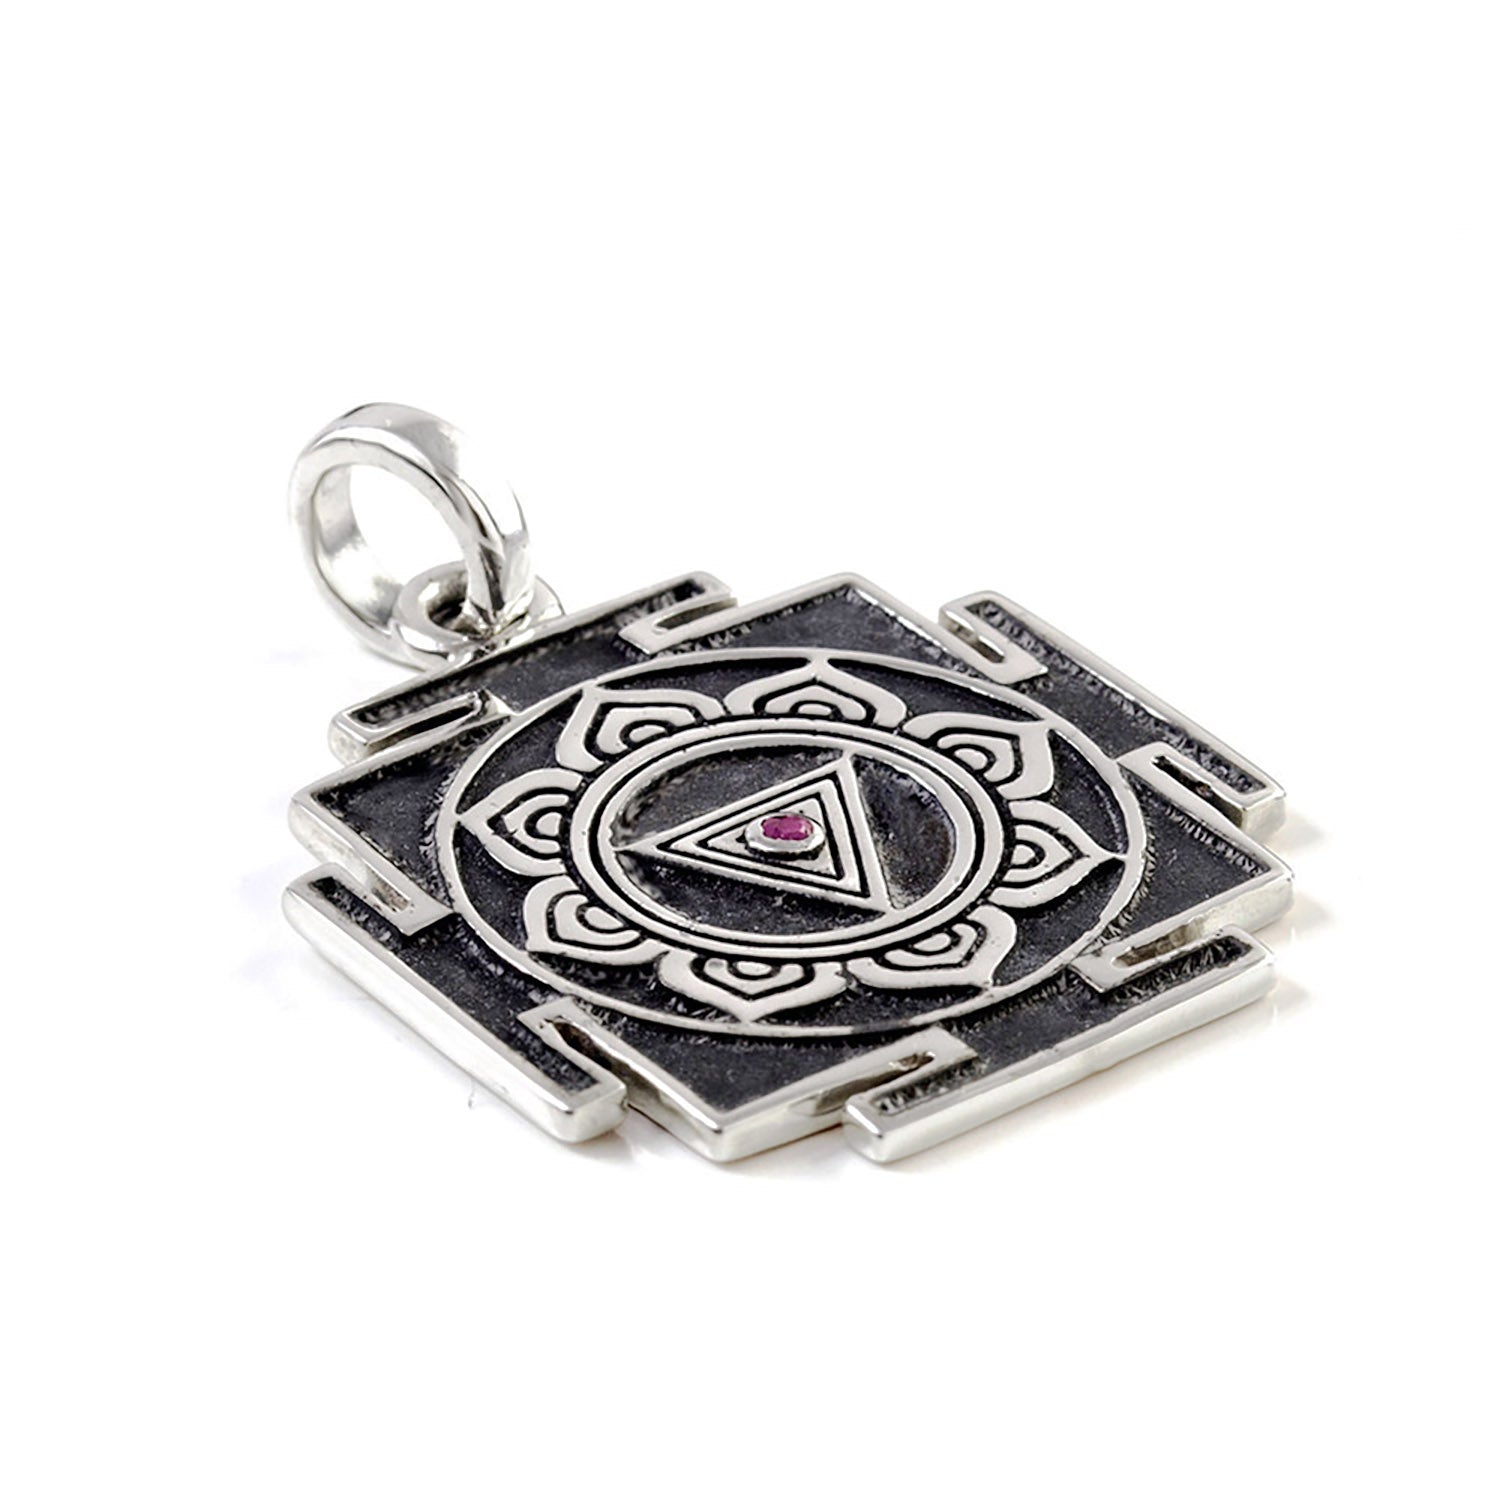 Kali Yantra pendant with ruby and blackened parts made of sterling silver with chain from ETERNAL BLISS - Spiritual jewelry